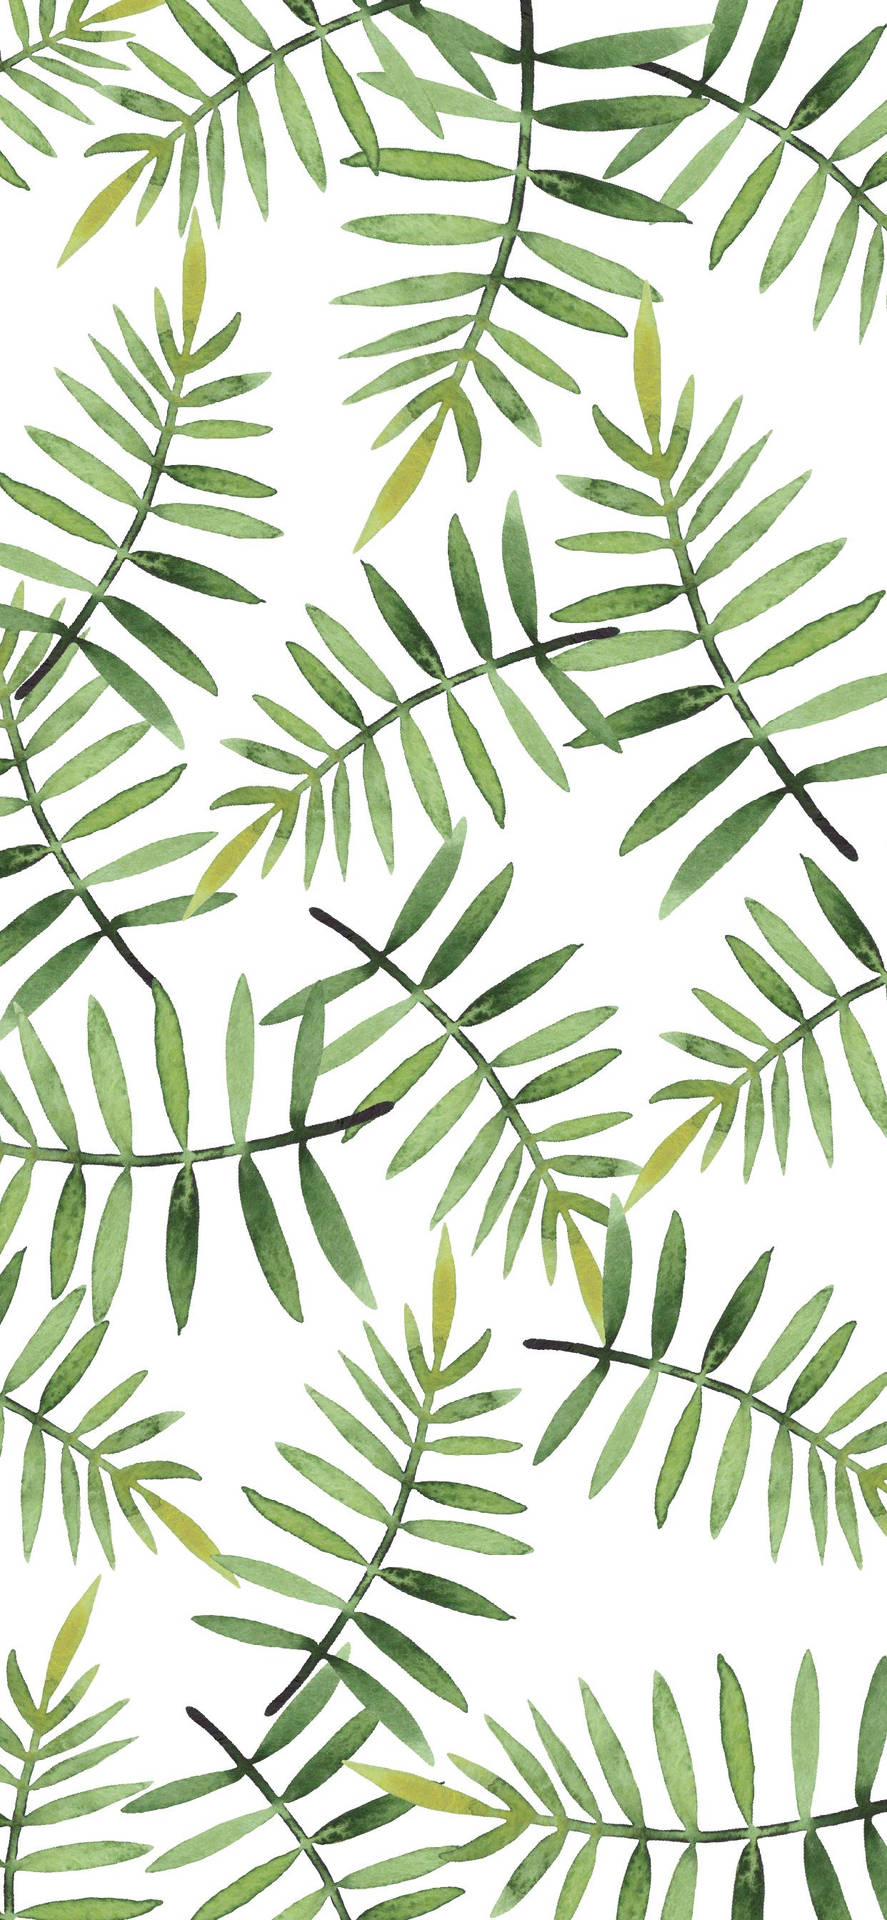 Dainty Leaves Iphone Wallpaper